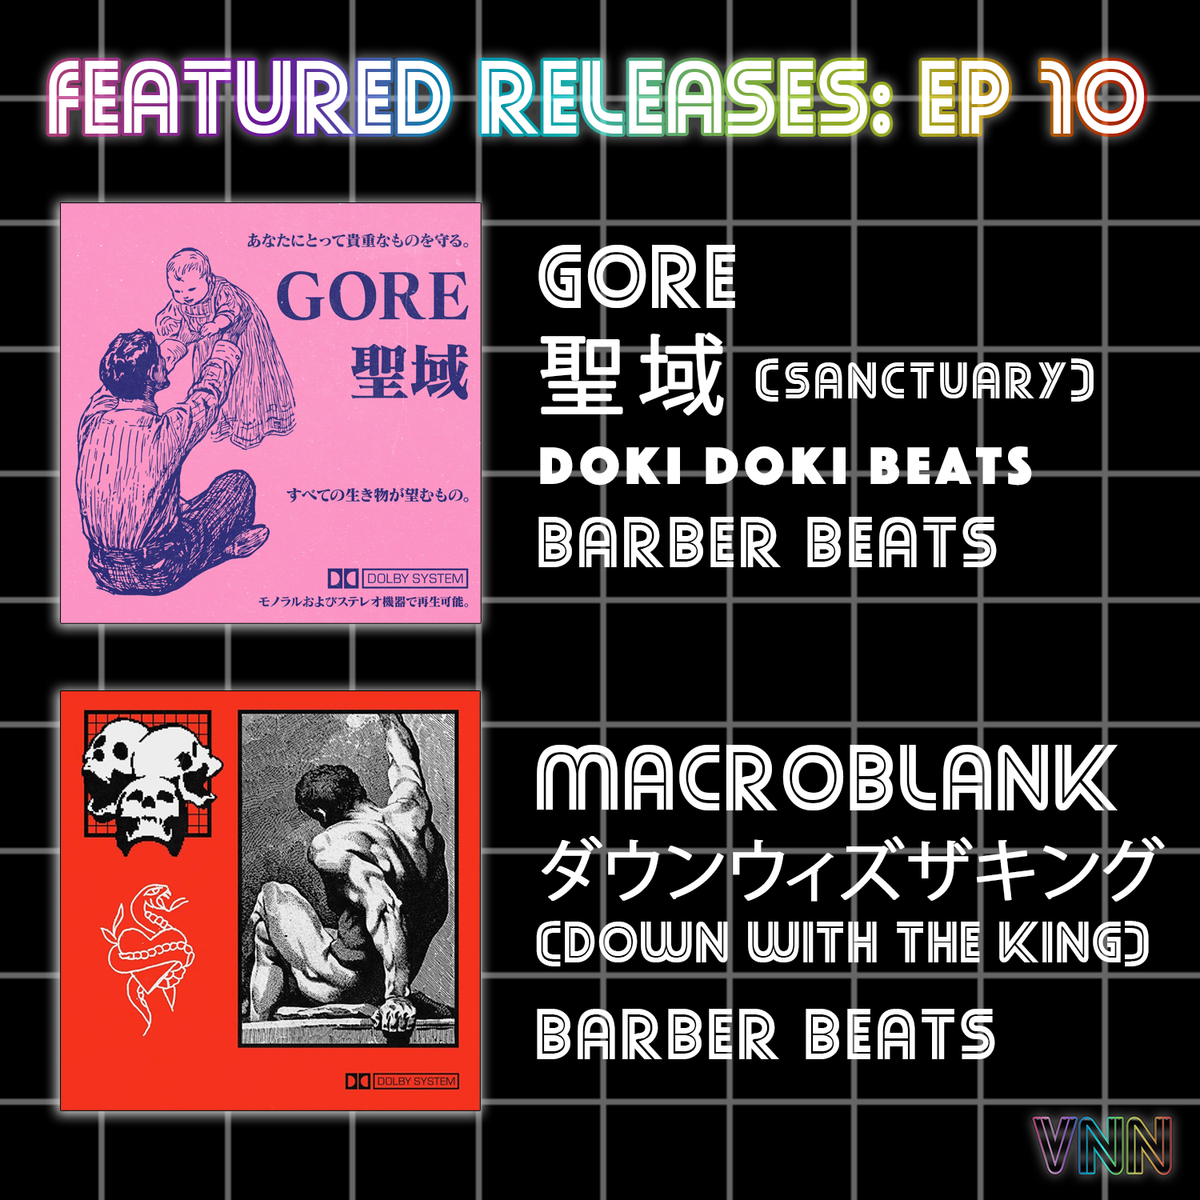 Featured Releases: GORE - 聖域 & MACROBLANK - ダウンウィズザキング (Down With The King)